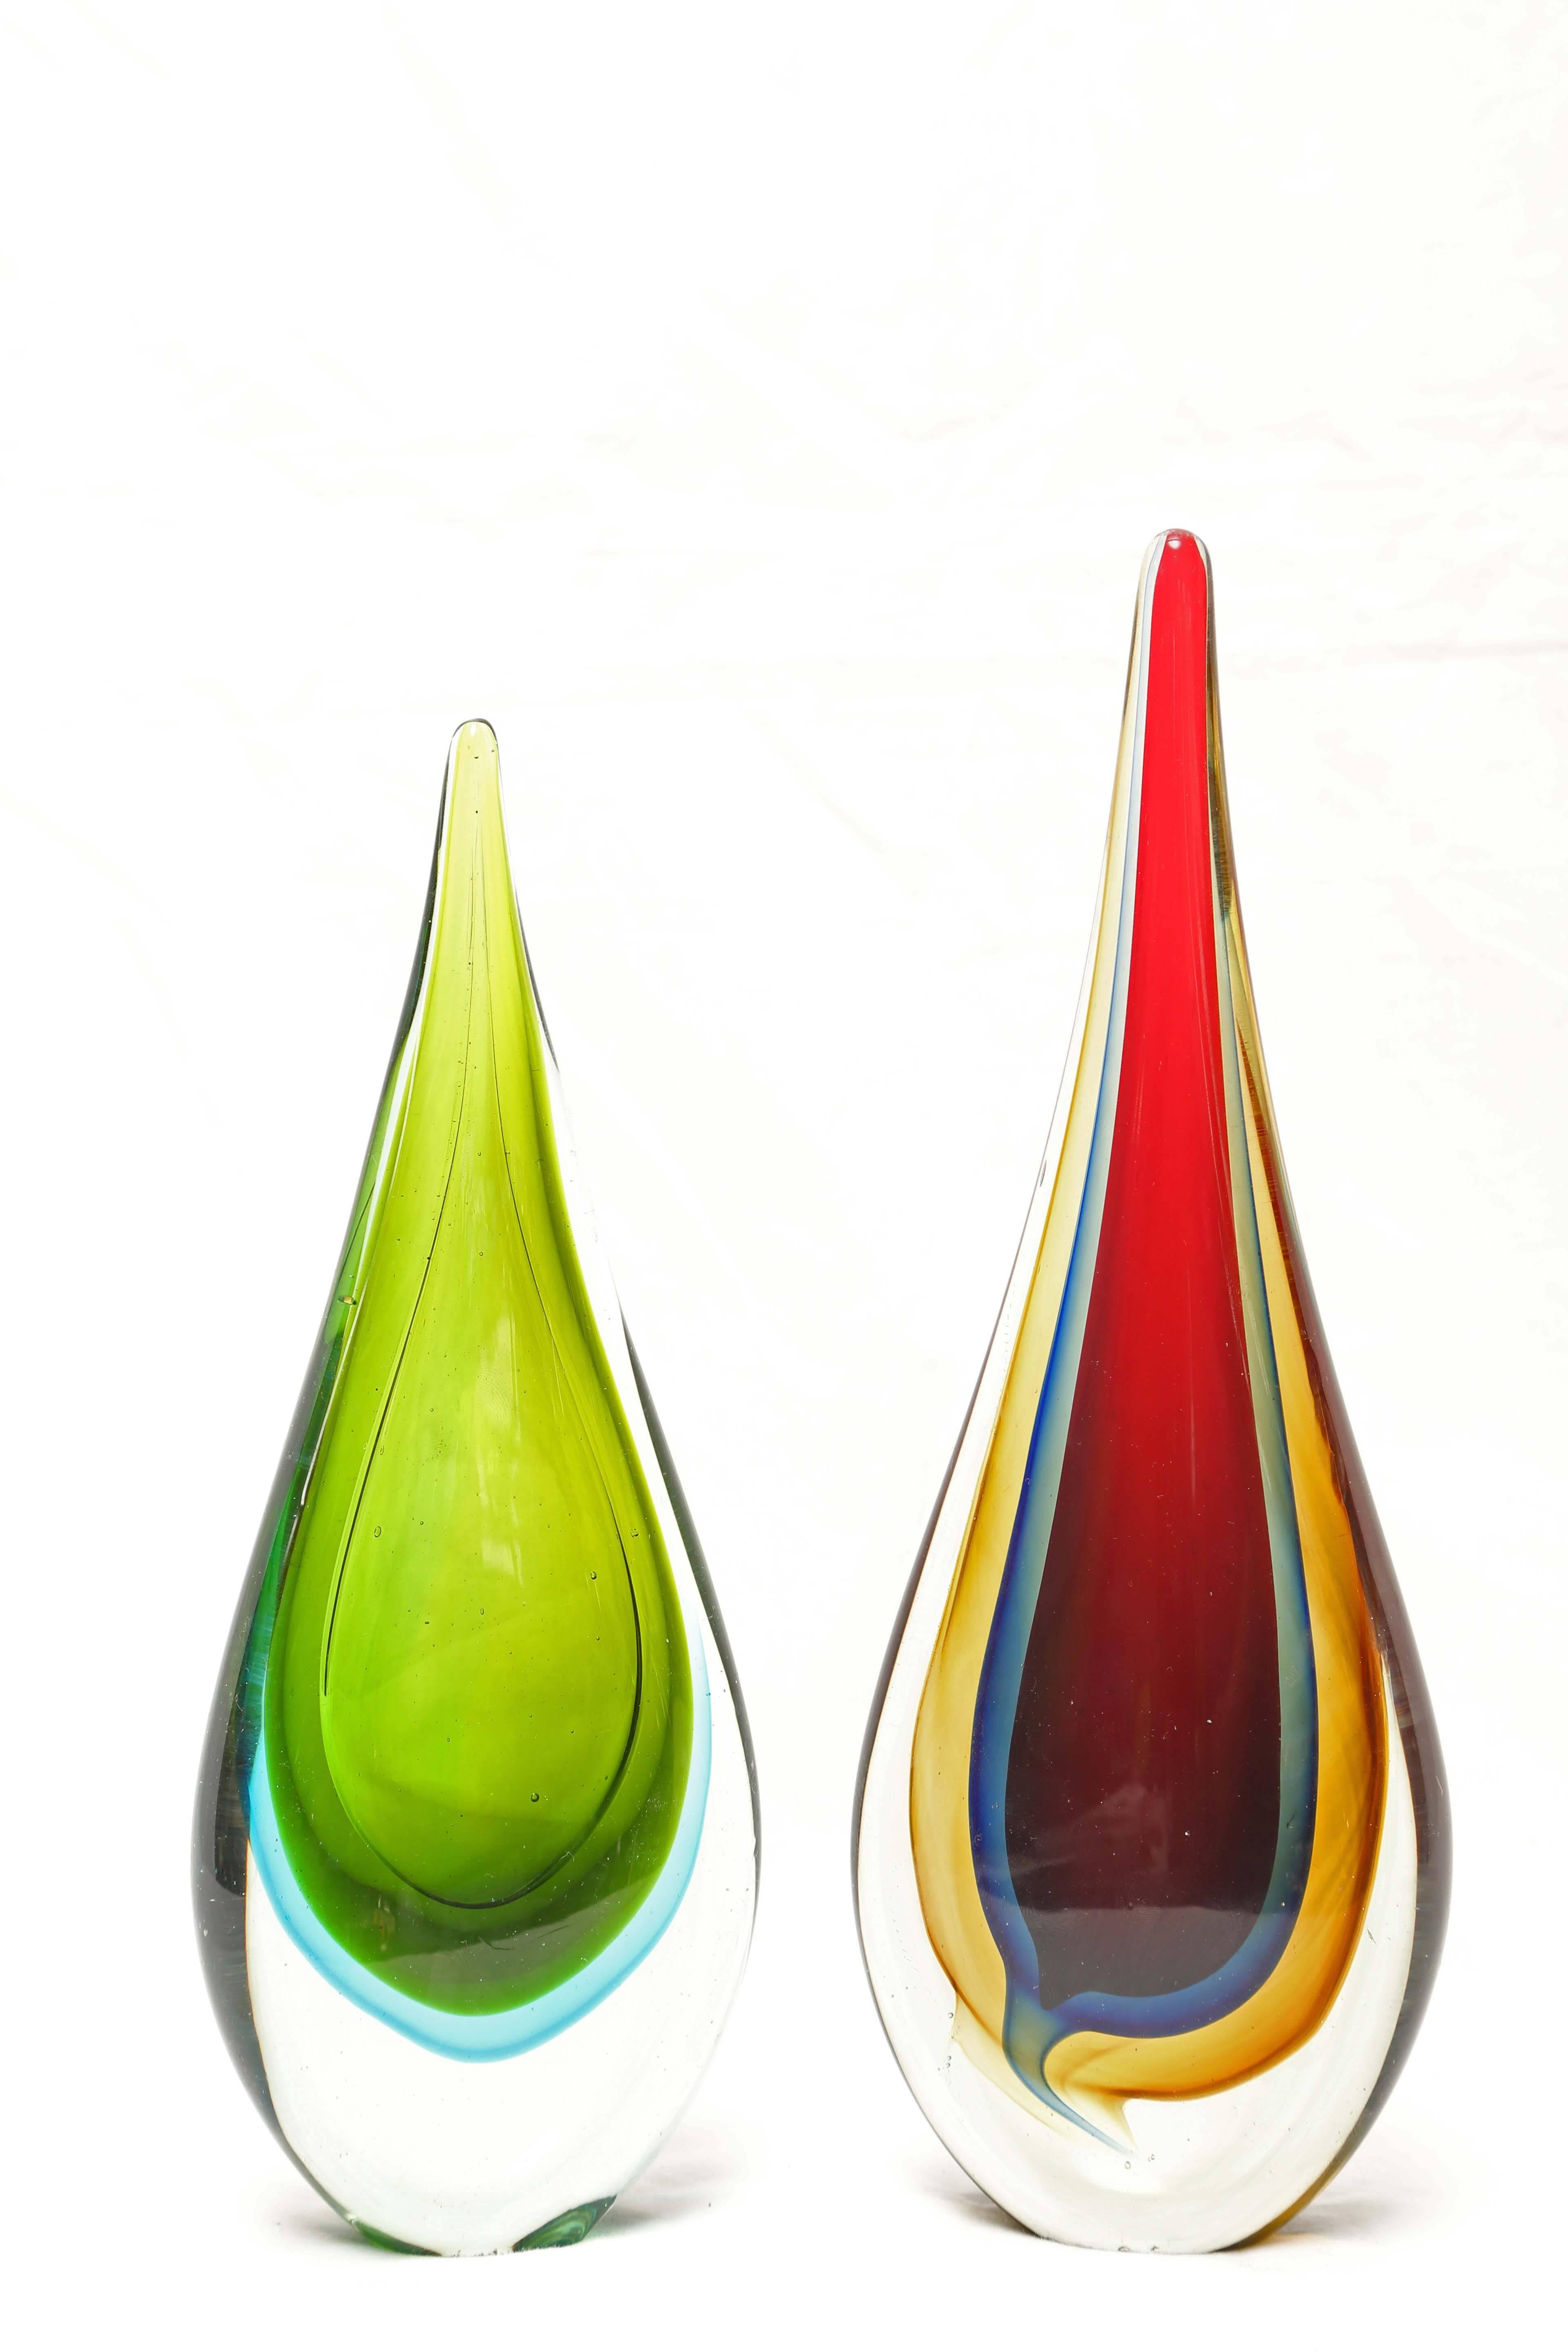 You are looking at two Italian Murano Sommerso glass teardrop sculptures in the style of Flávio Poli for Seguso. These are quite stunning in person. The larger of the two is primarily in red with a grayish blue and golden color all encased in a